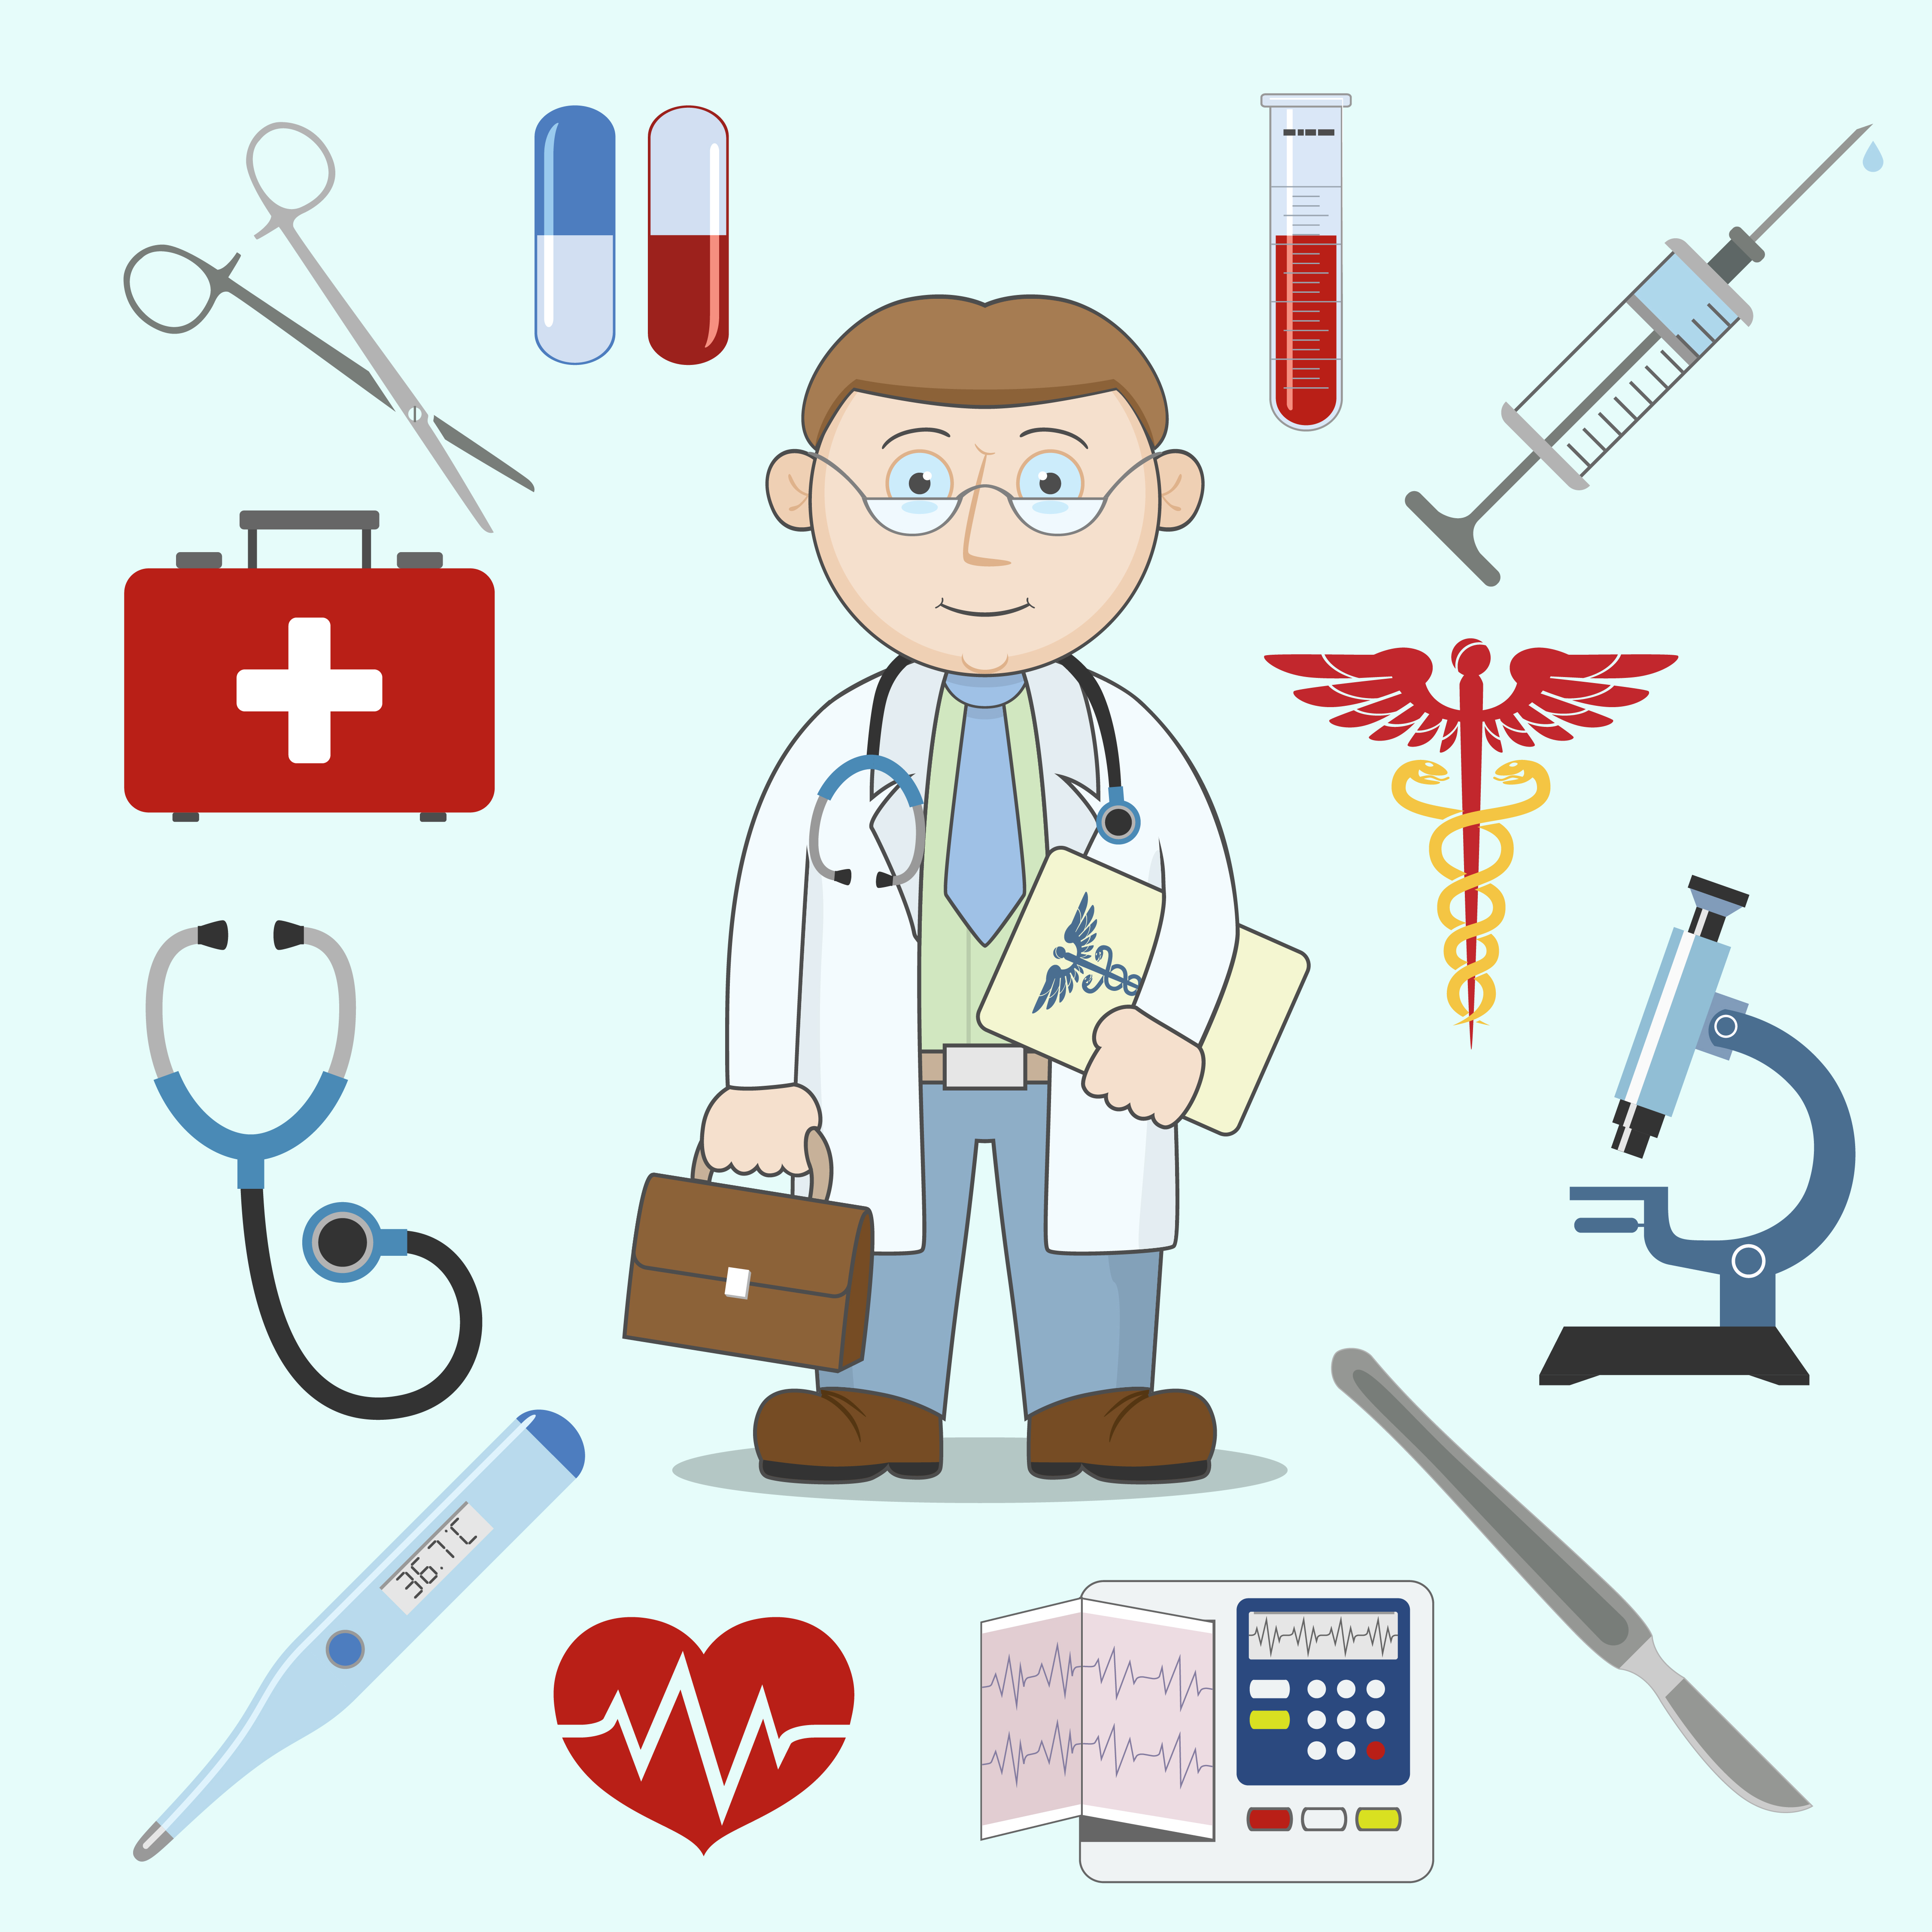 Download Doctor character with medicine icons - Download Free Vectors, Clipart Graphics & Vector Art